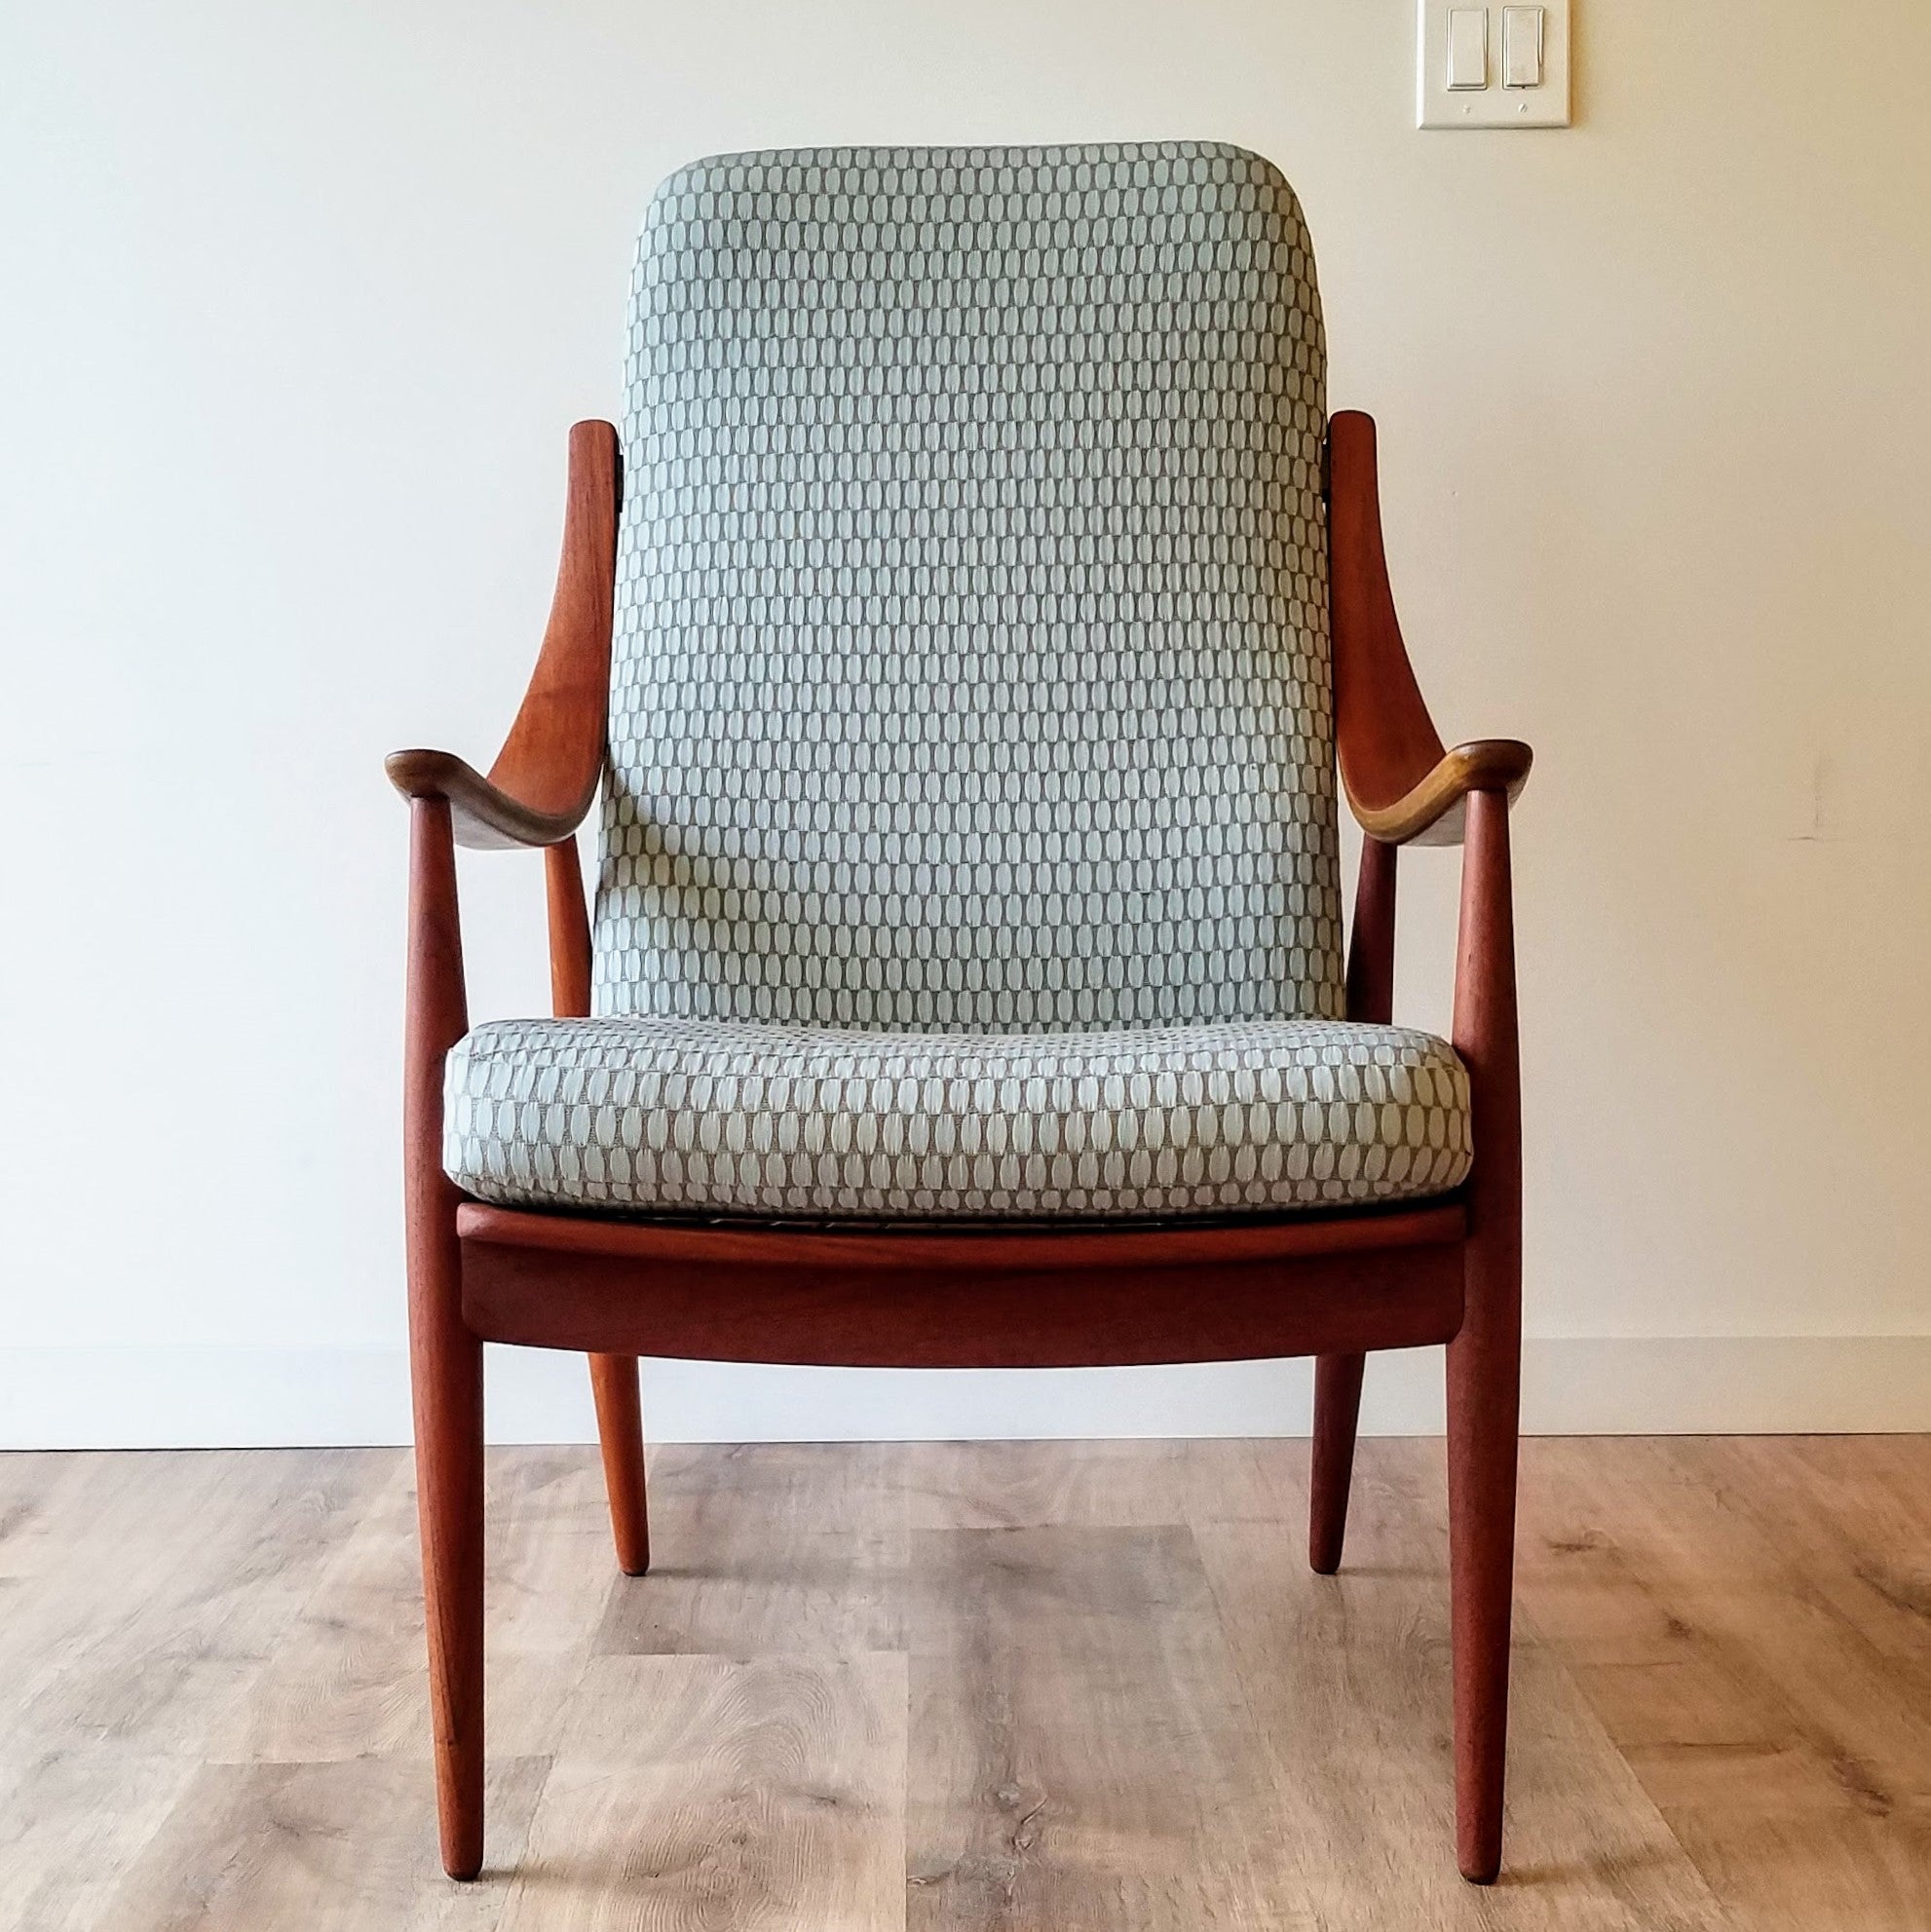 Front View of a Danish Modern Lounge Chair designed by  Peter Hvidt & Orla Molgaard-Nielsen for France and Son. See this chair and other restored vintage furniture at SPARKLEBARN in Seattle,WA.